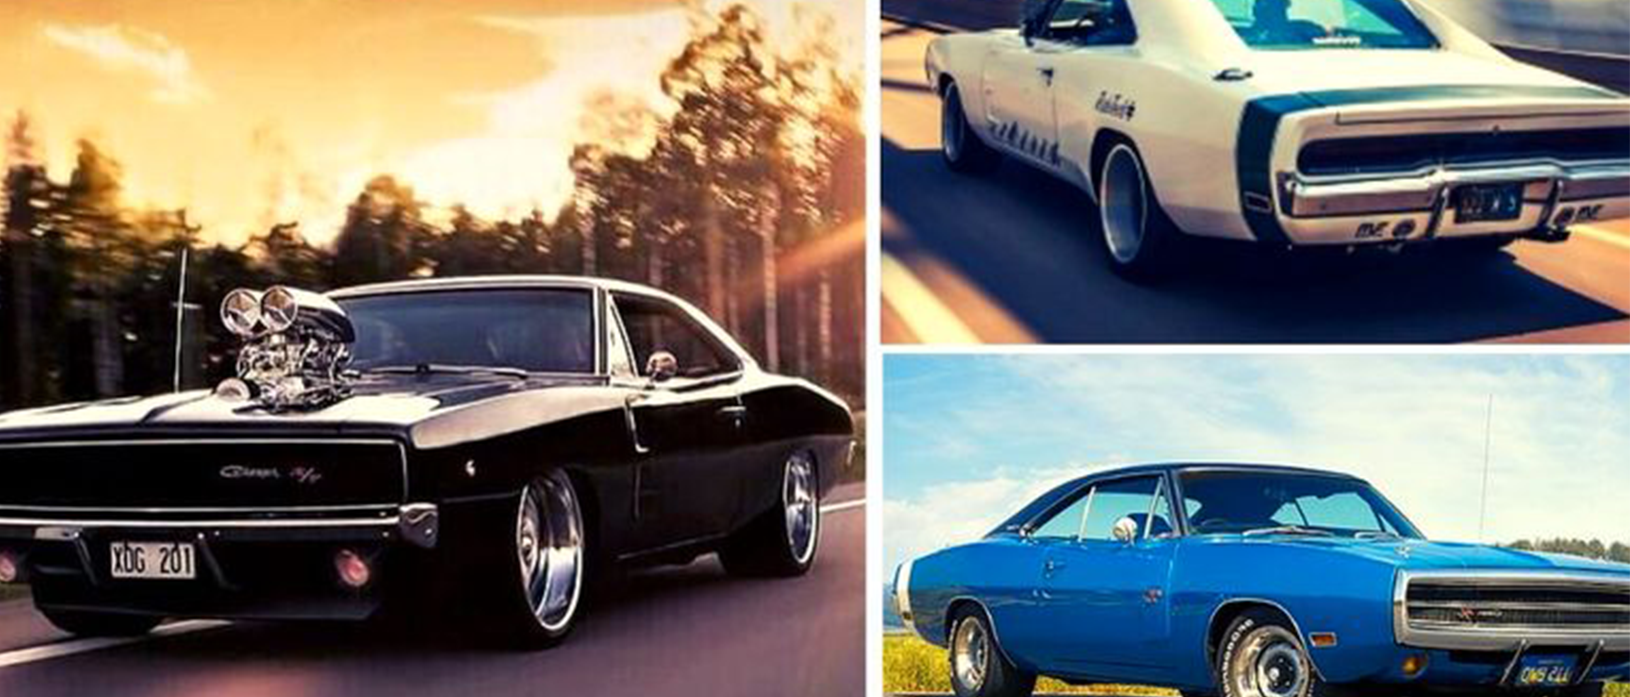 Dodge Charger: Few Enhancements Needed